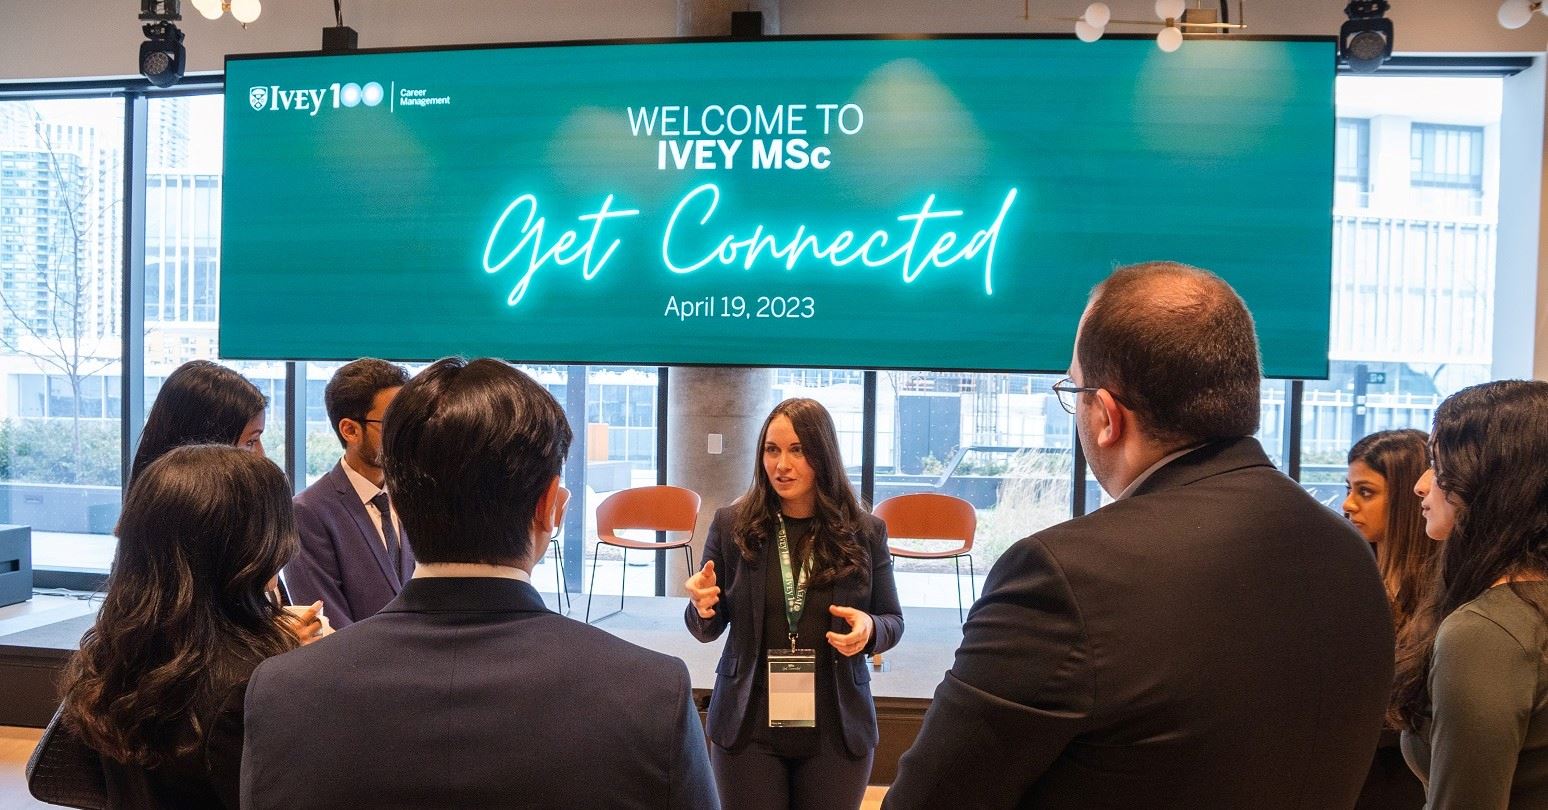 MSc students get career-ready at inaugural Get Connected event